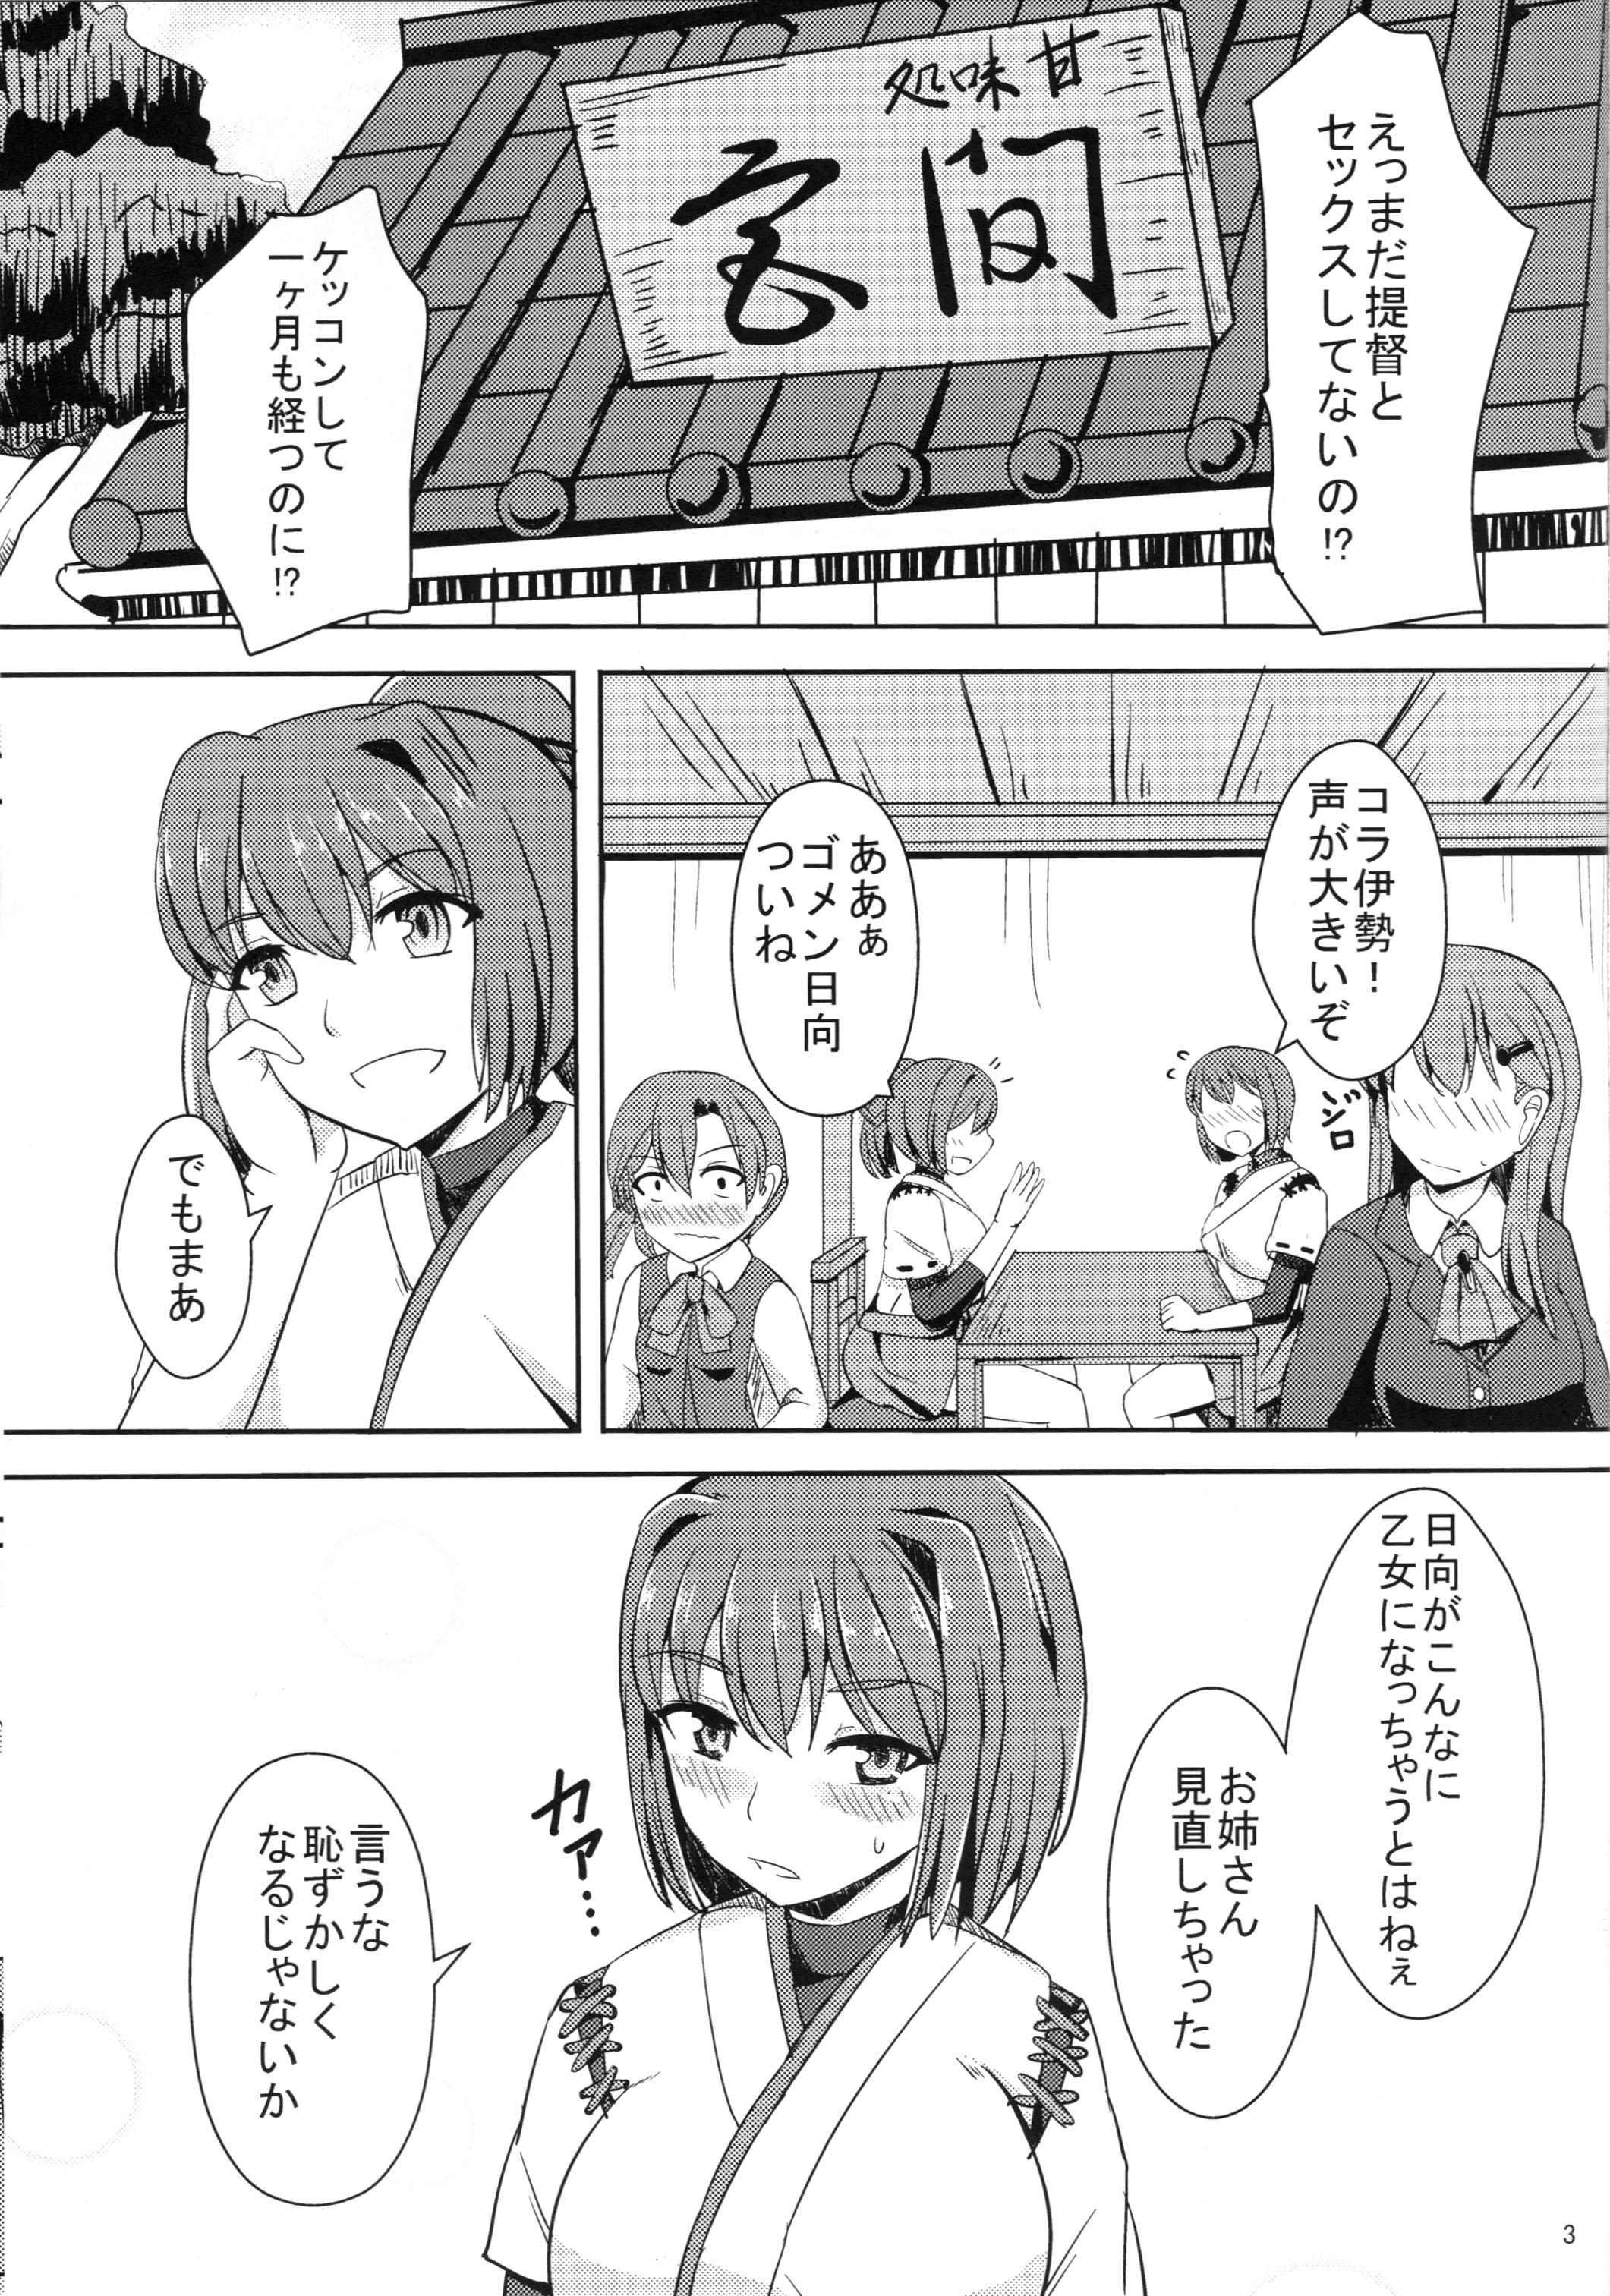 Denmark Man the Love - Kantai collection Juicy - Page 4